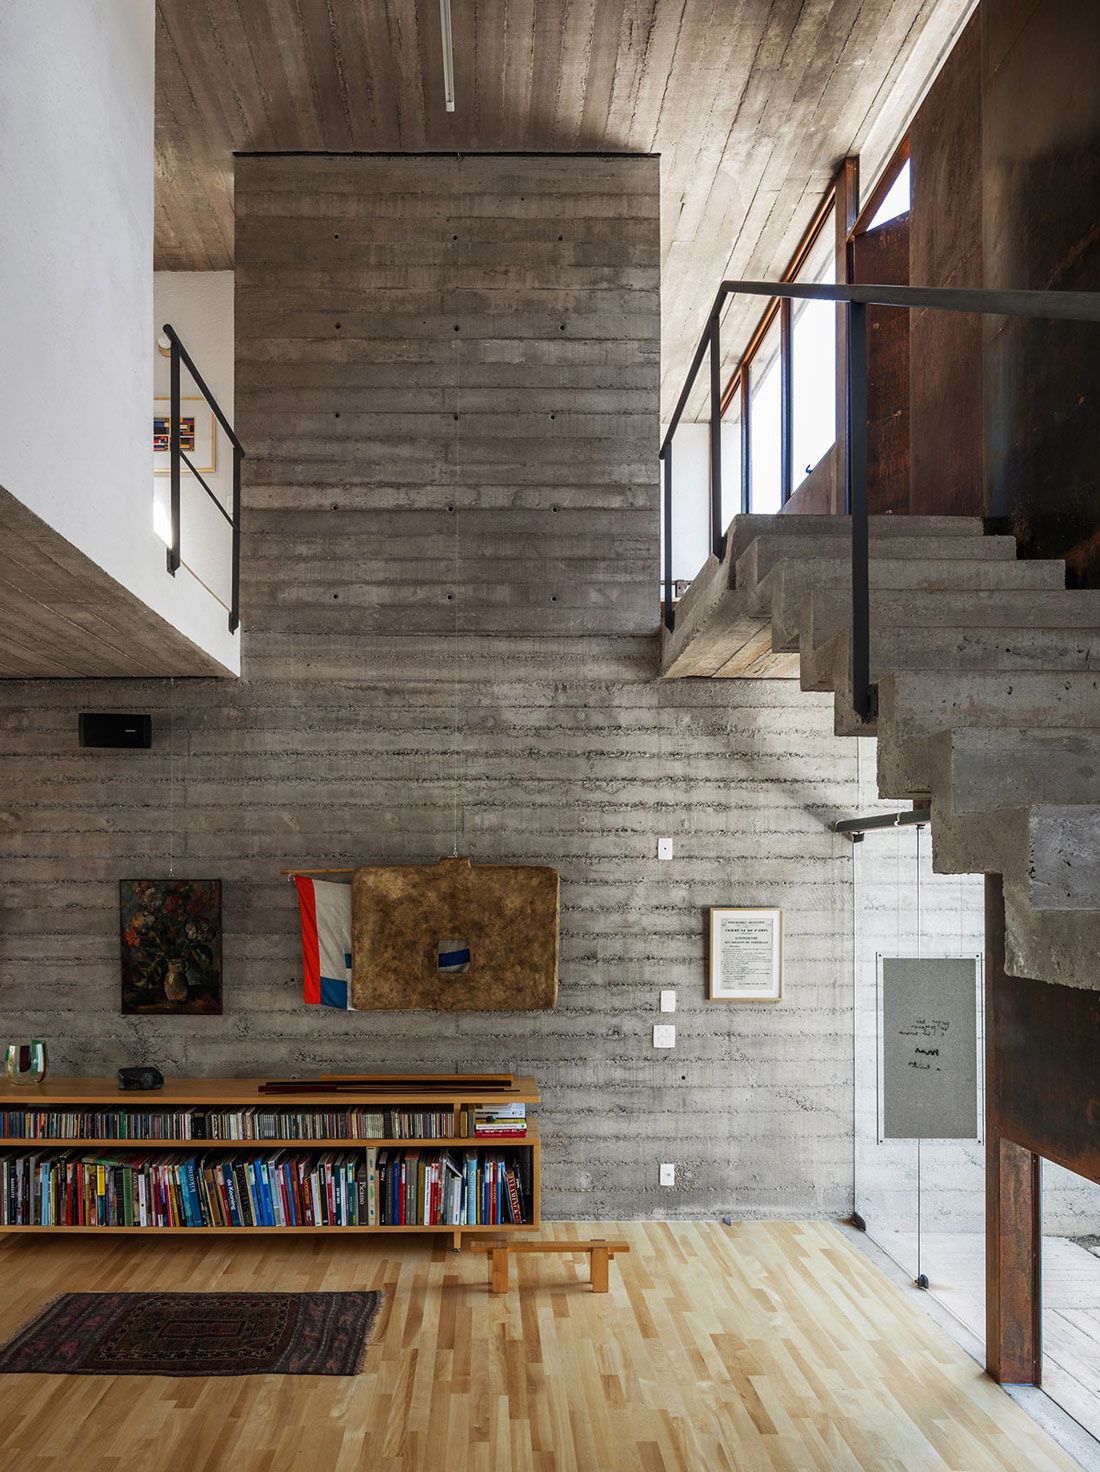 Concrete Wall, Art, Wooden Flooring, Urban House In São Paulo, Brazil :  Fresh Palace Regarding Concrete And Wood Wall Art (View 12 of 15)